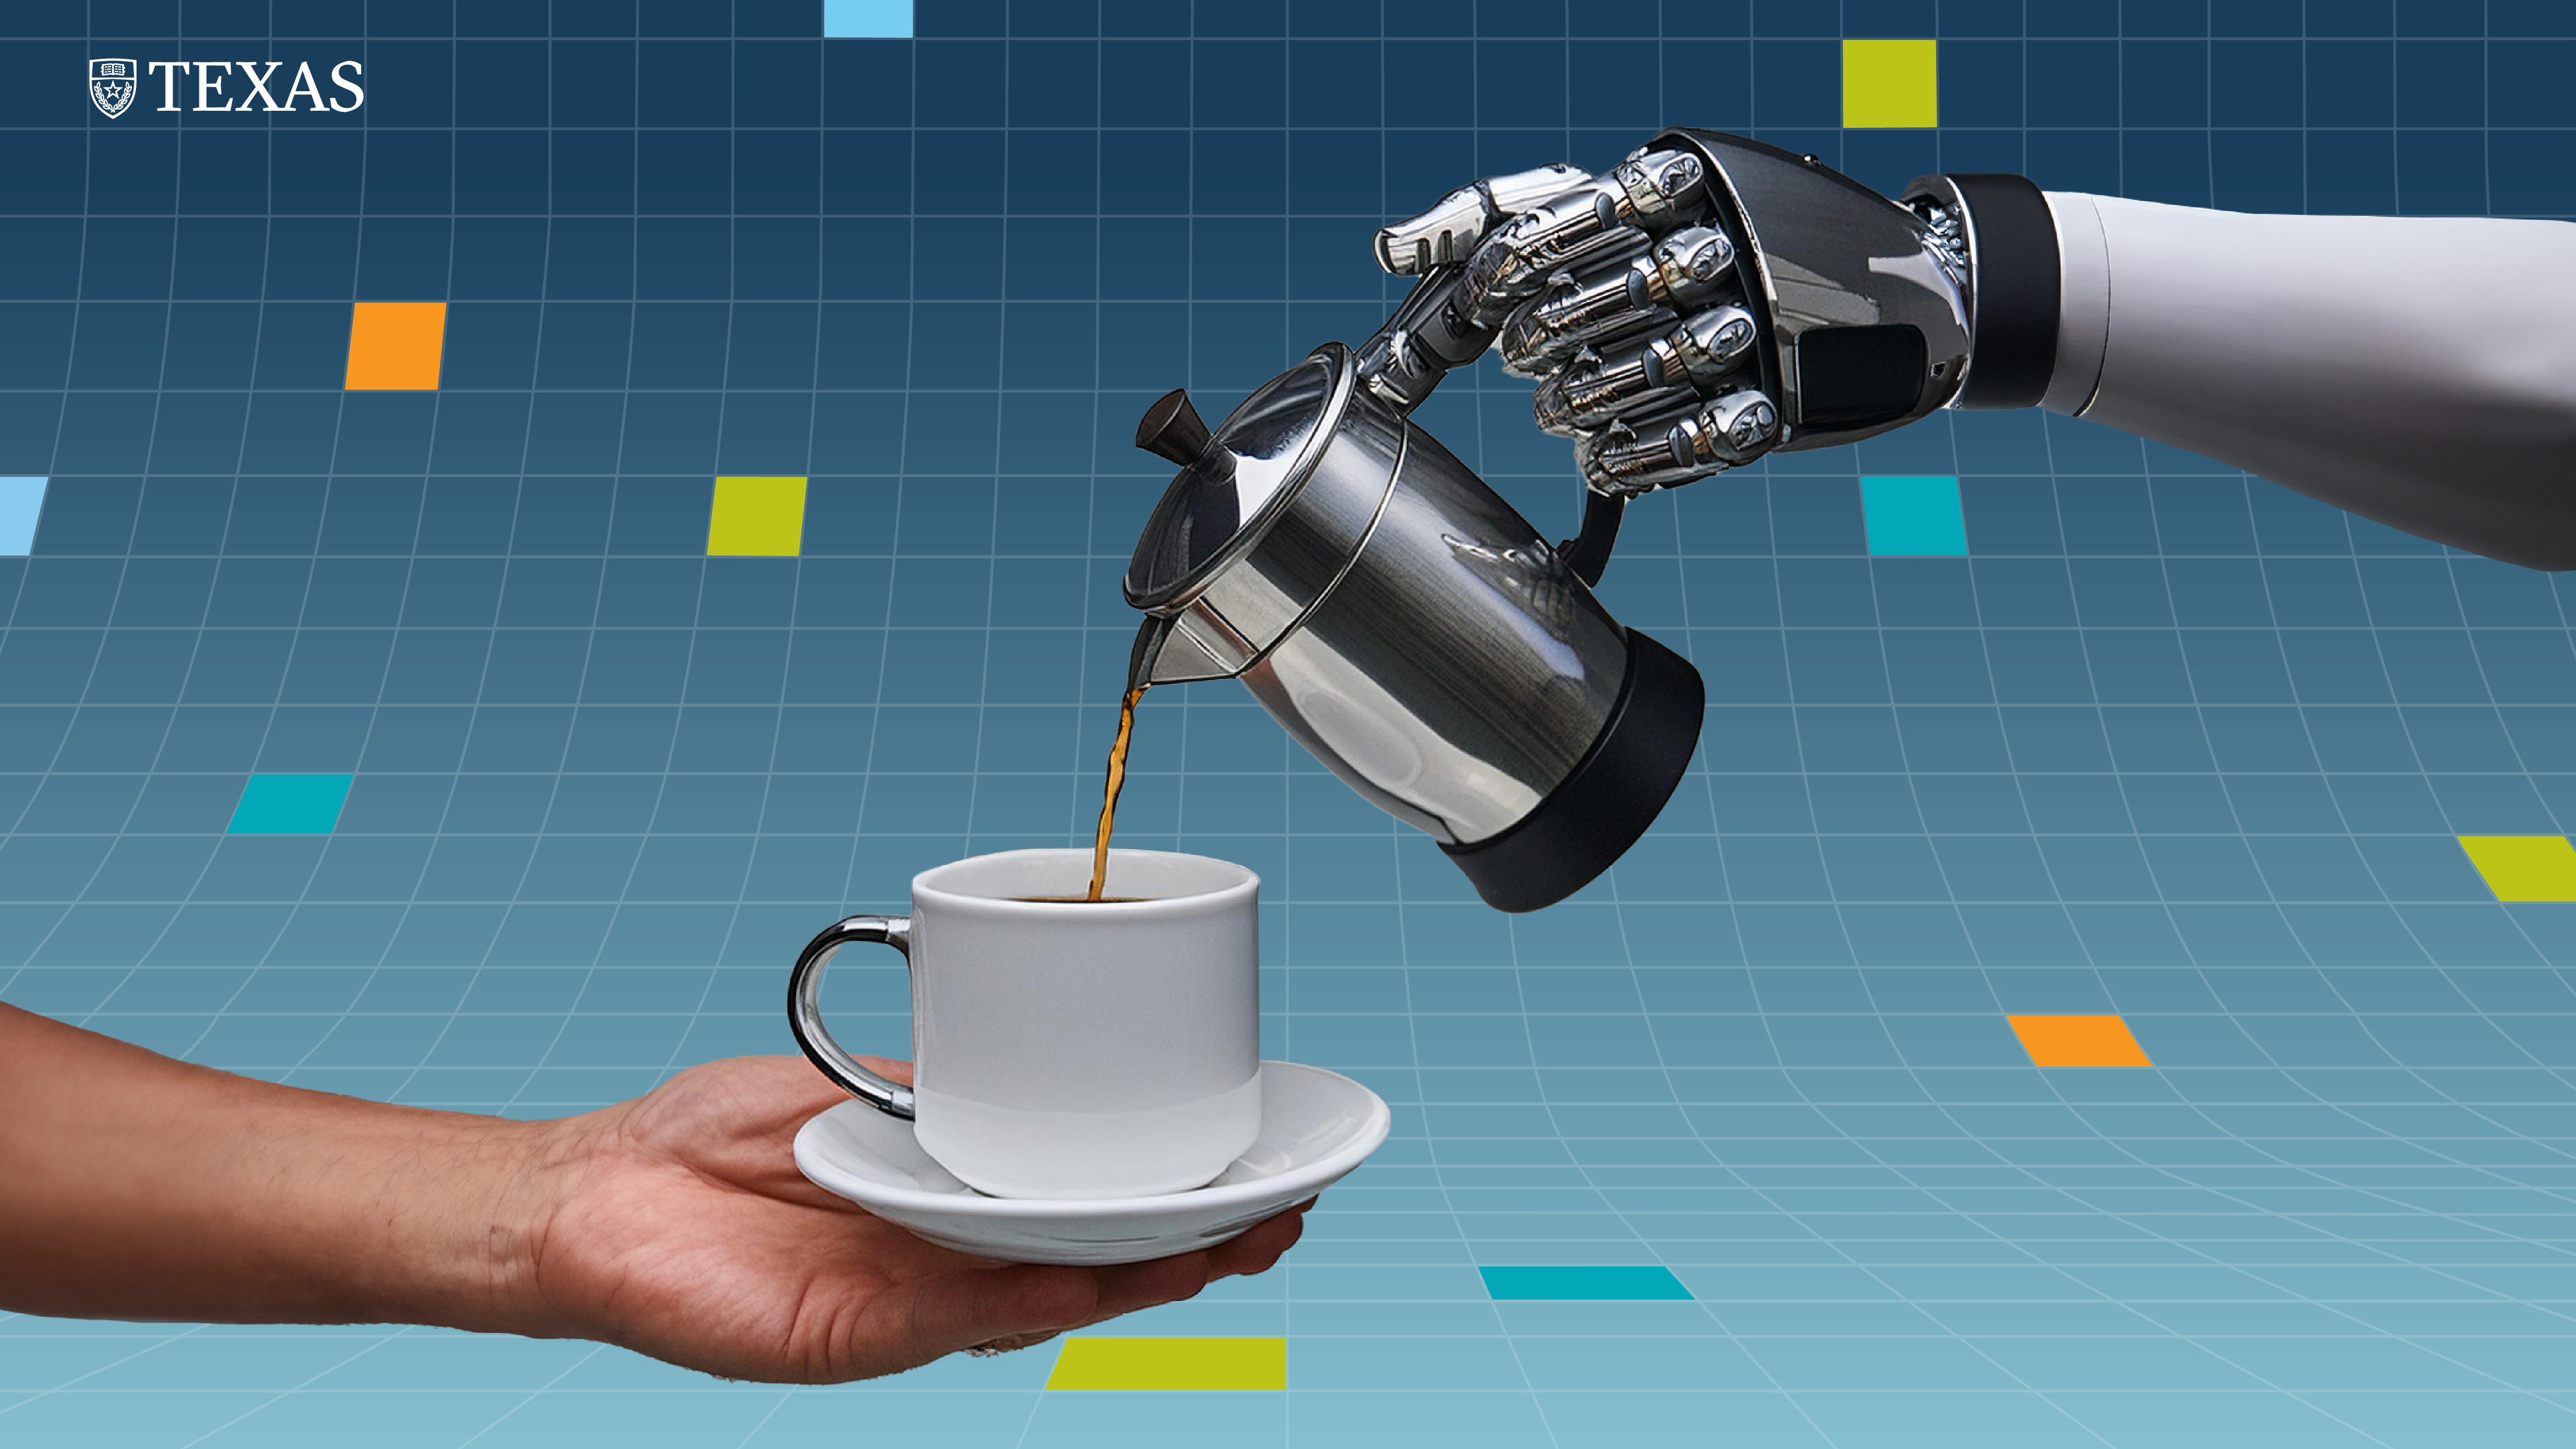 A robotic hand pours coffee into a mug being held by a human hand